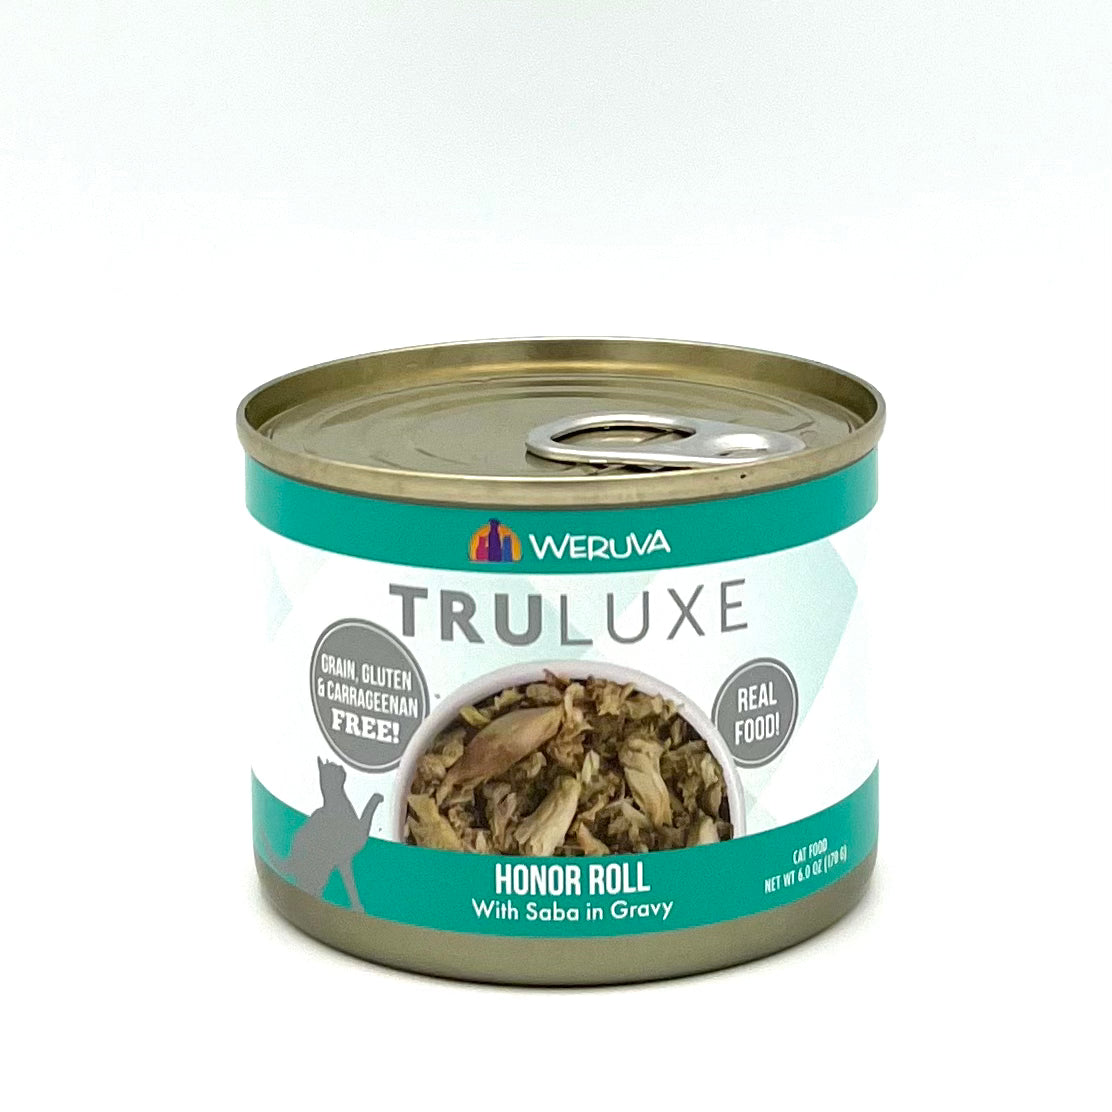 Truluxe Honor Roll 6oz